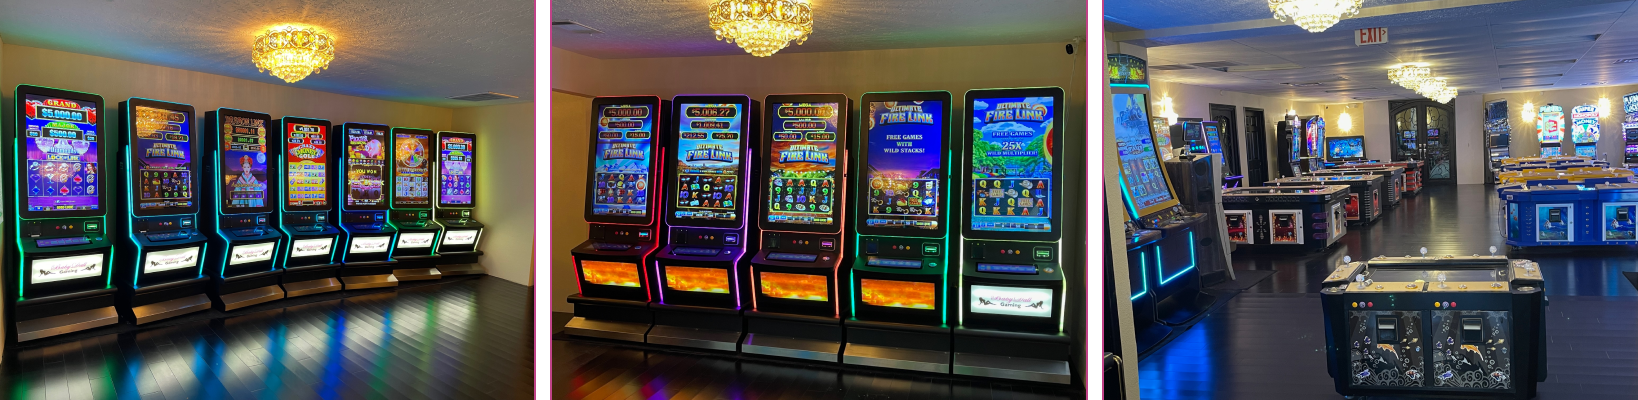 Used Gaming Machines For Sale